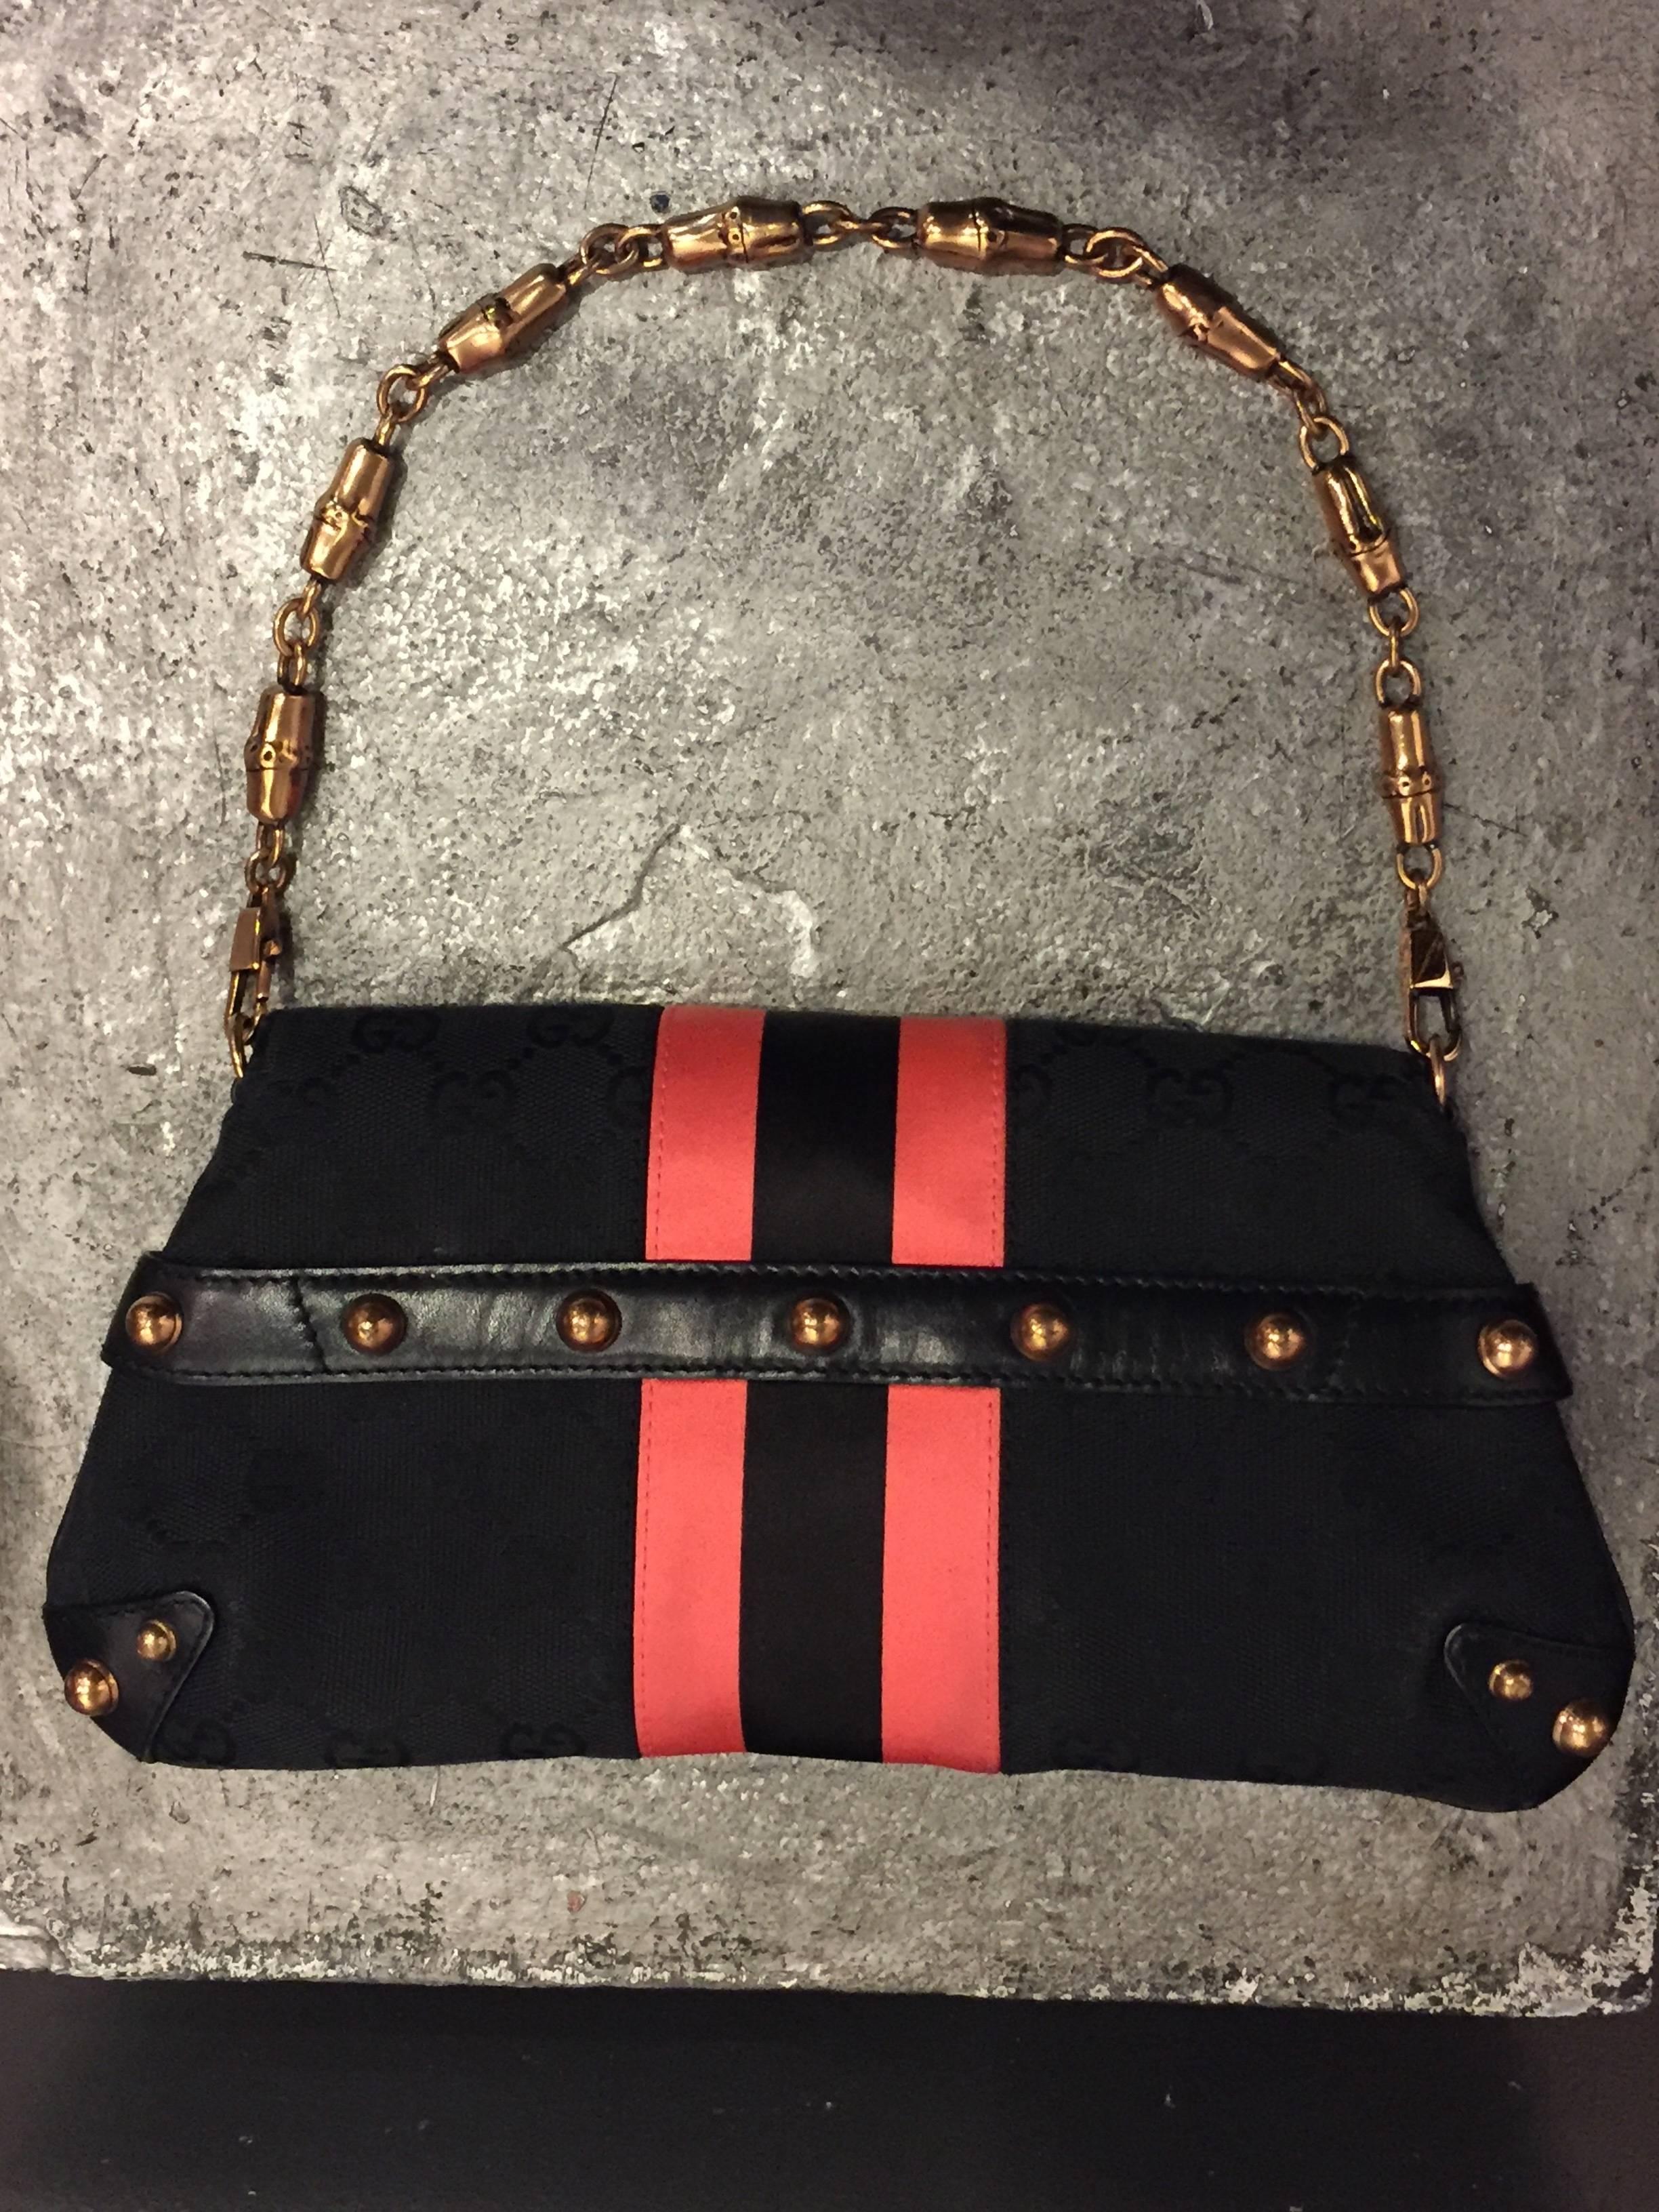 Women's Tom Ford for Gucci Racing Stripe and D-Ring Snaffle Bit Canvas Purse